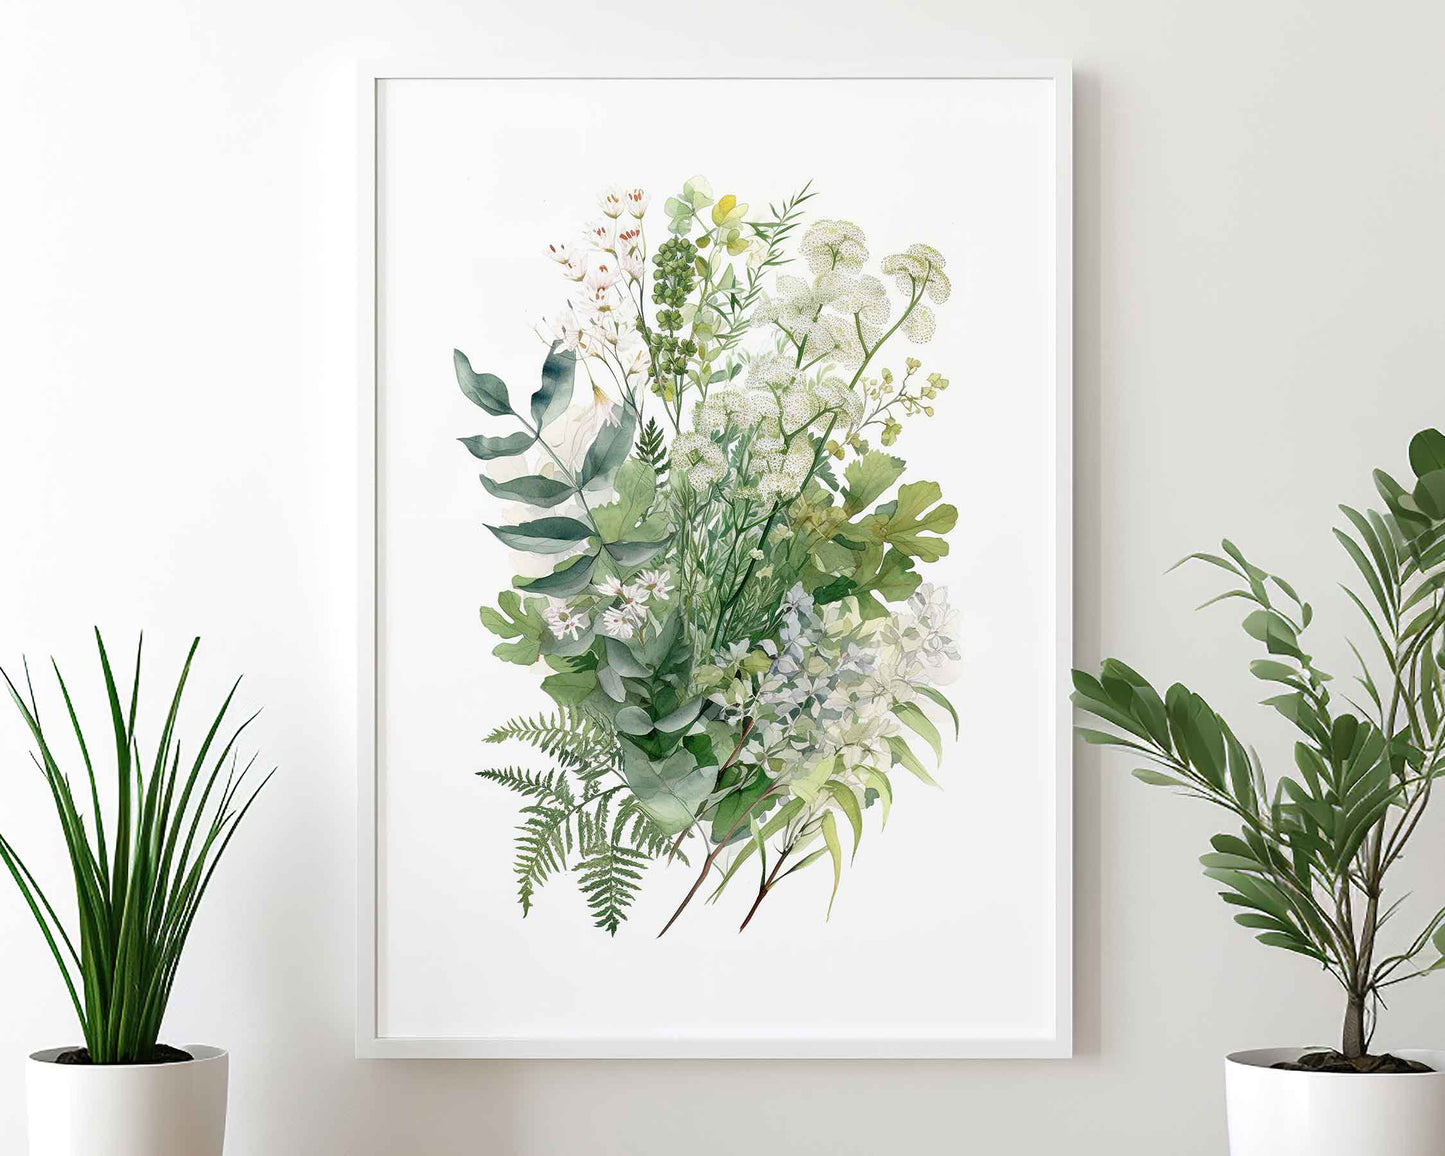 Framed Image of Botanical Art Wall Poster of Eucalyptus and Fern Leaf Paintings